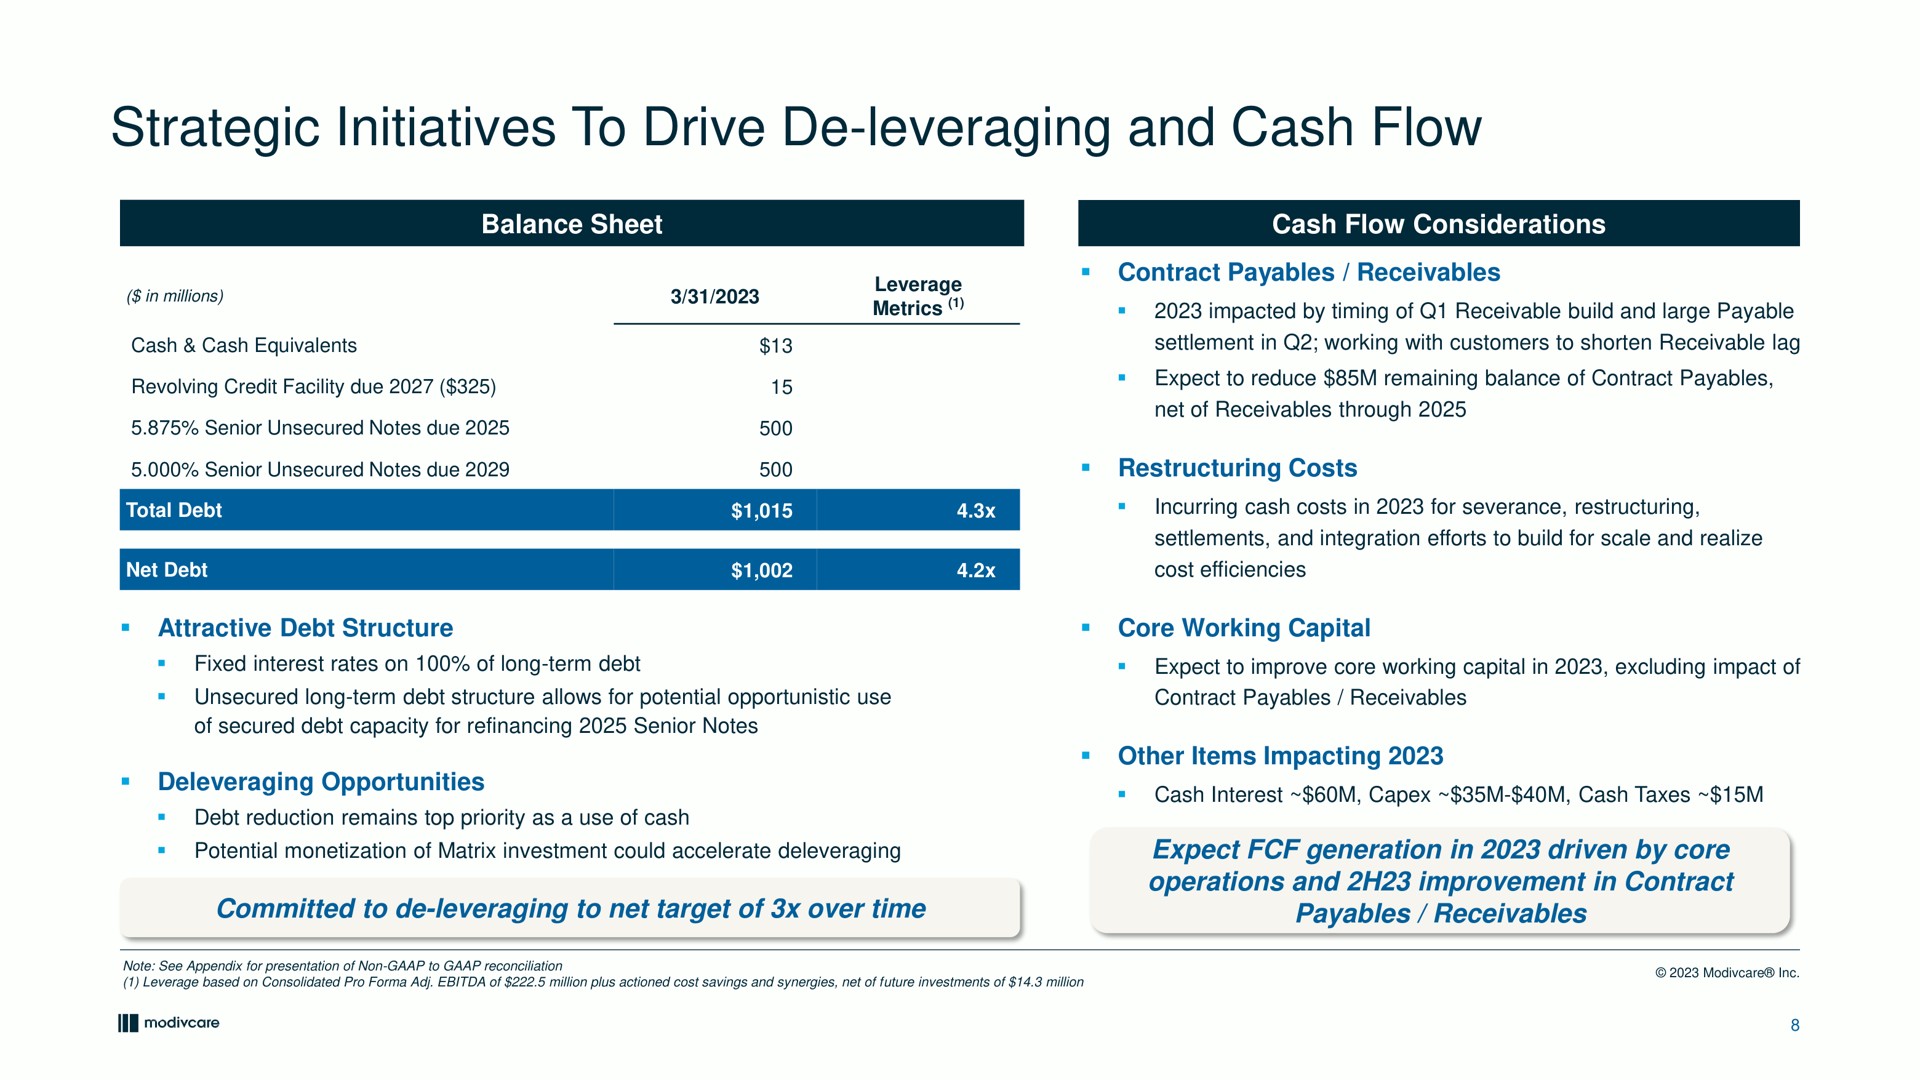 strategic initiatives to drive leveraging and cash flow | ModivCare